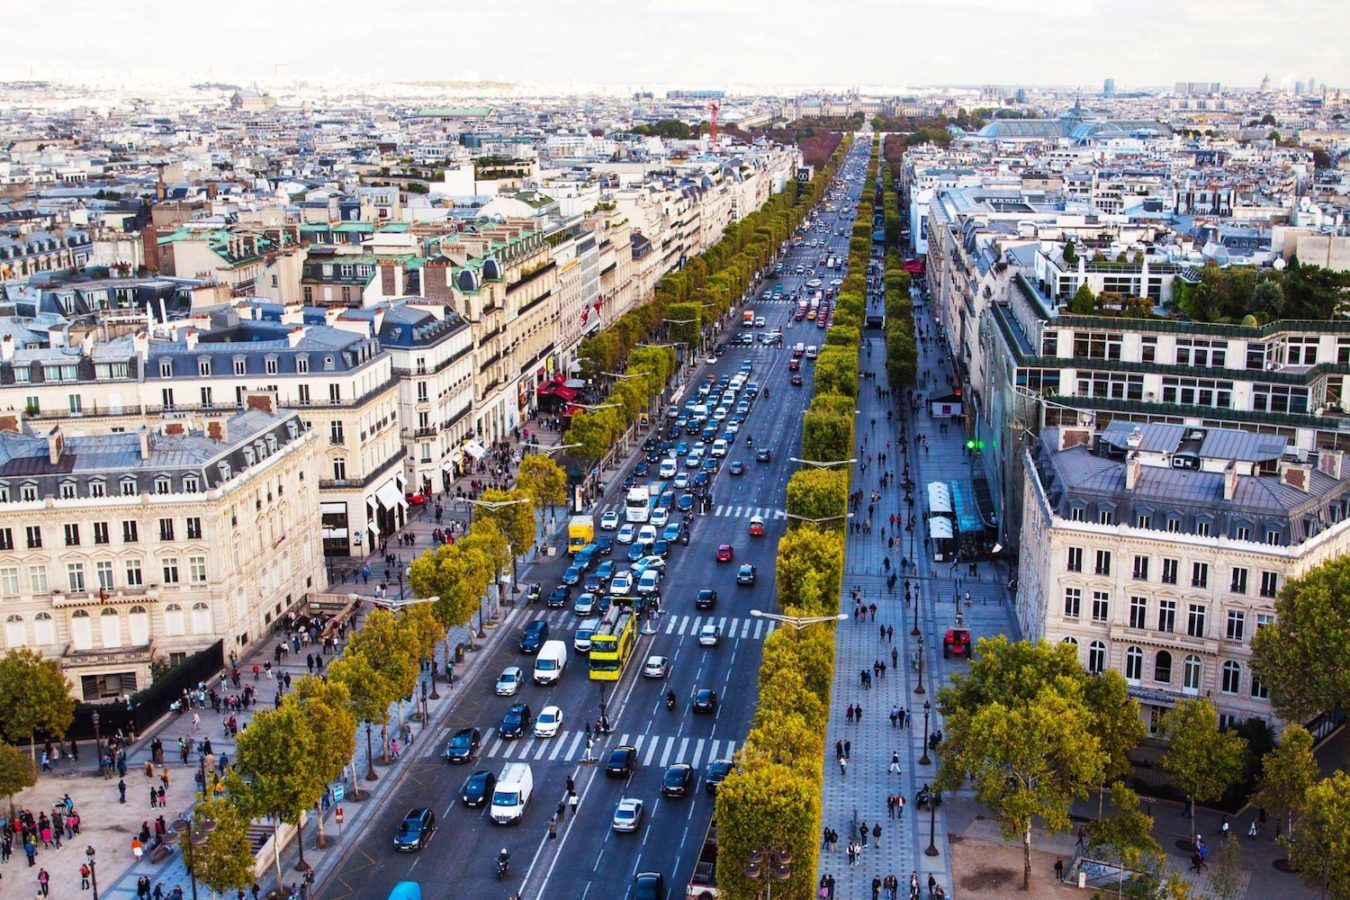 Paris is planning to transform Champs-Elysees into a lush garden